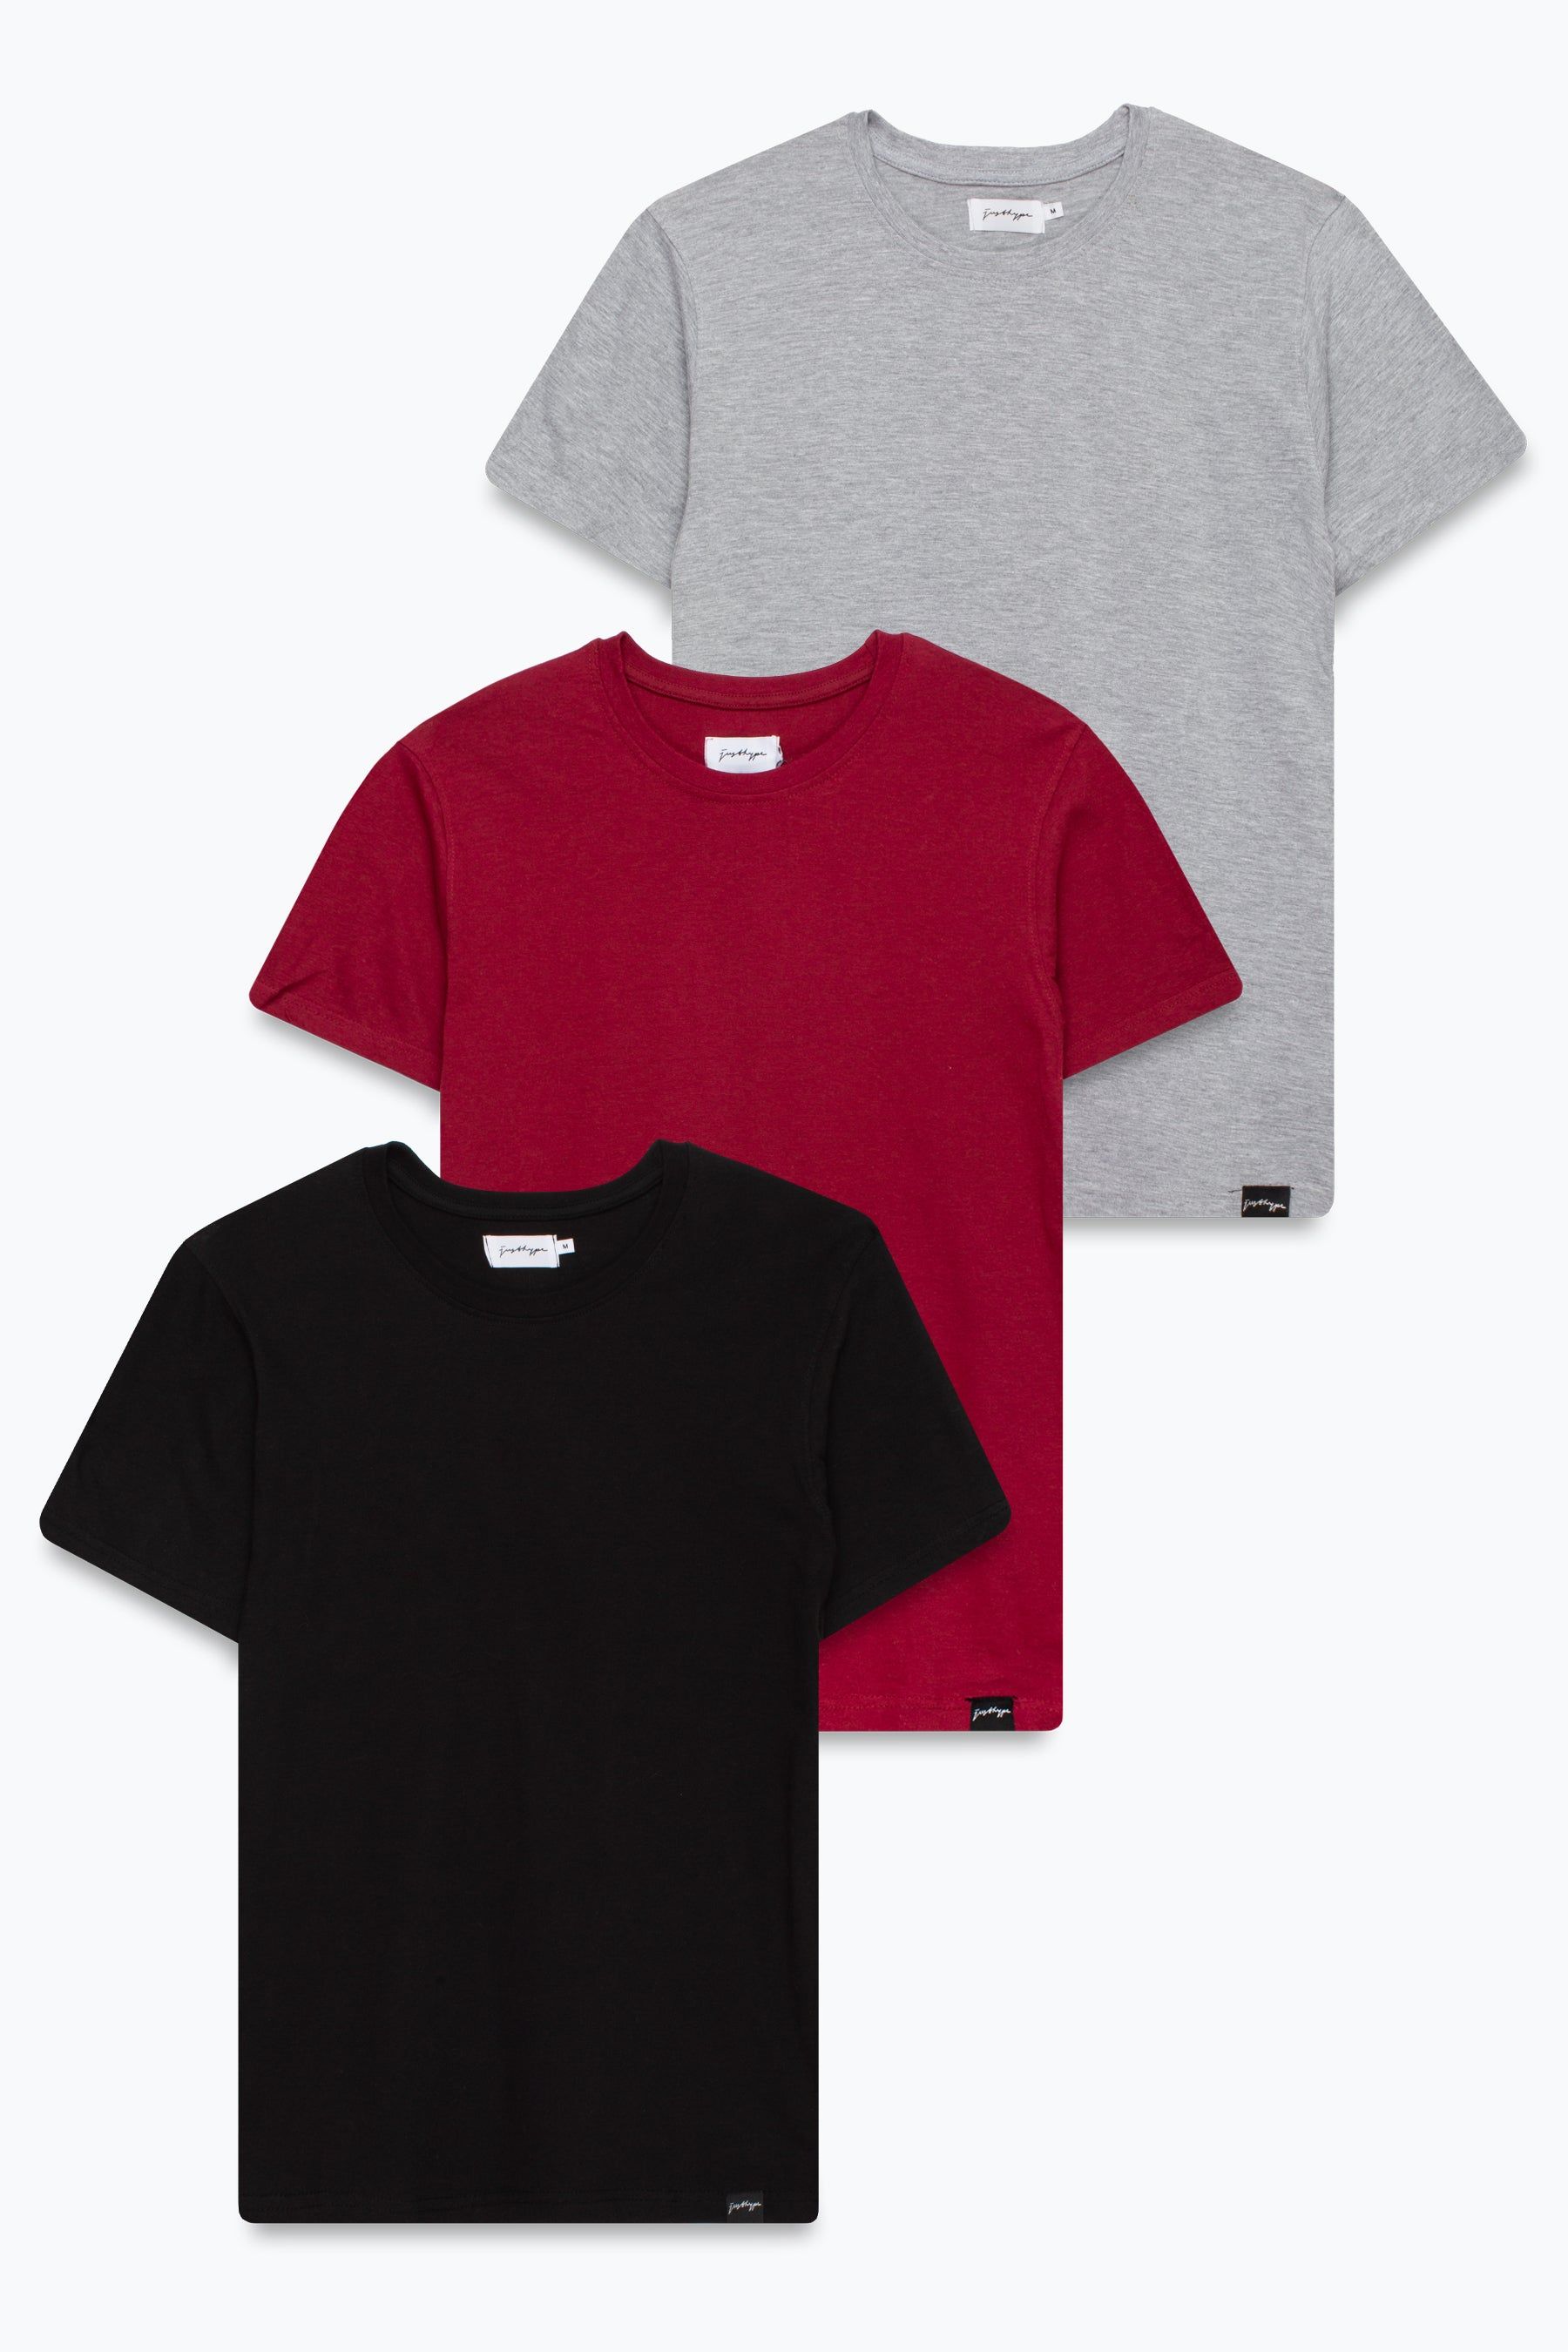 Make the most of your spending and stock up on our Men's 3-pack t-shirts. Each t-shirt is designed with a soft-touch fabric base for the ultimate comfort and breathable fabric. Highlighting a crew neckline and short sleeves for a classic fit. Your everyday tees just got simpler. The model wears a size M. Machine washable.